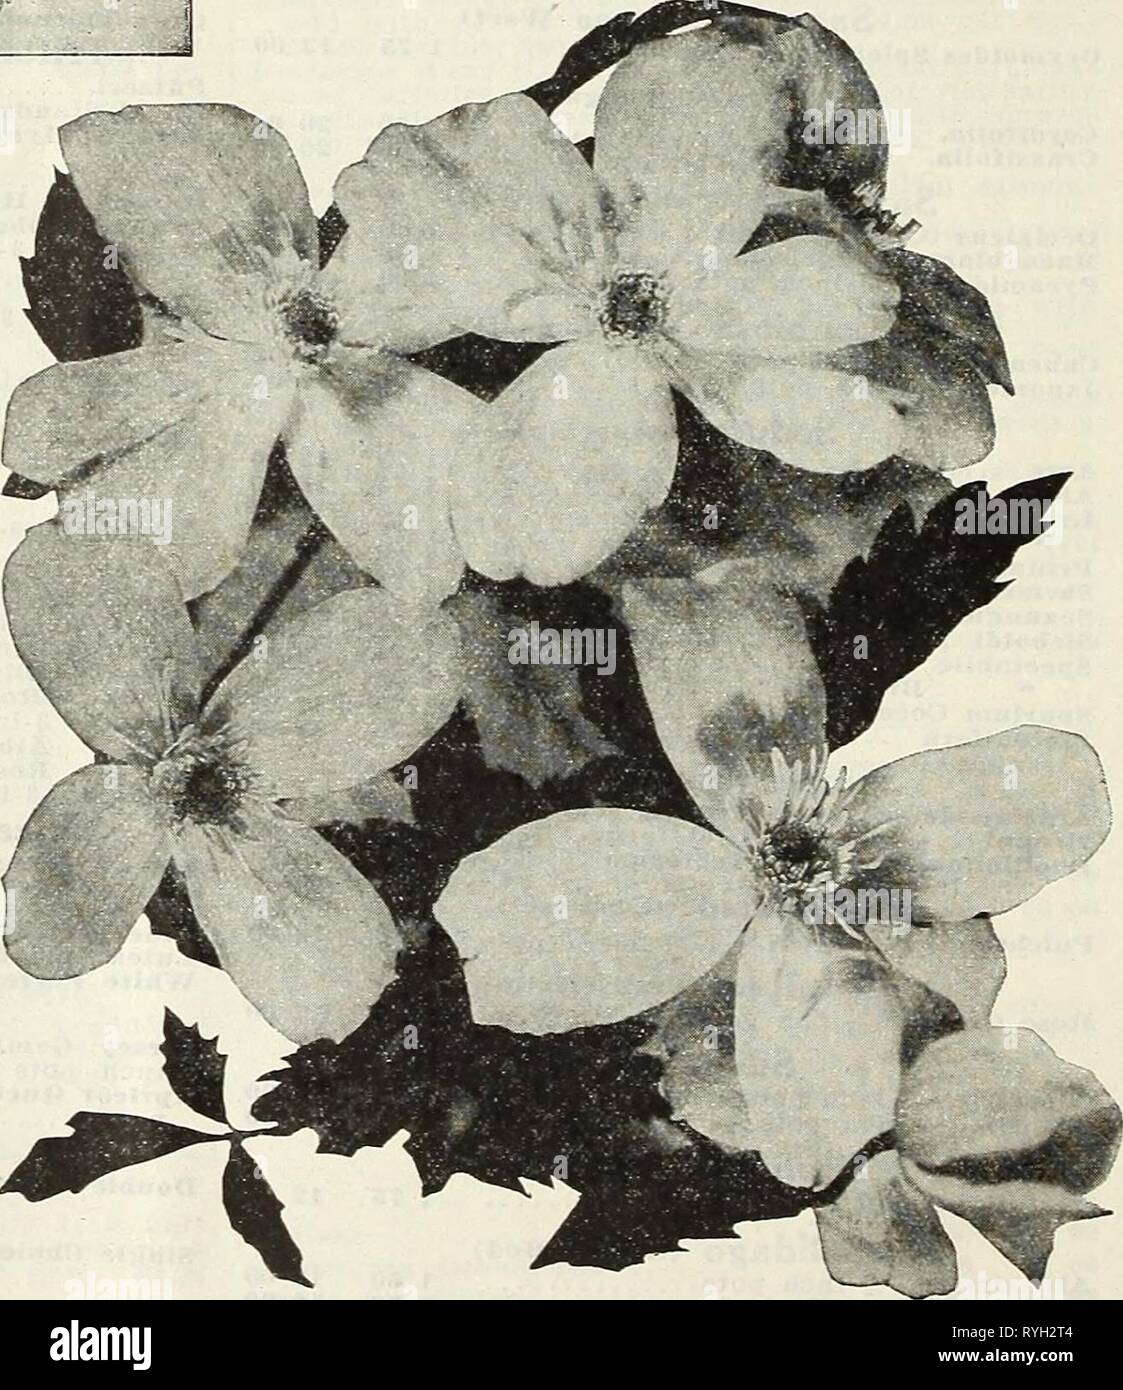 Dreer's wholesale price list for florists : special spring edition  dreerswholesalep1931henr 0 Year: 1931  strong two-year-old field-grown plants, doz.; $25.00 per 100. i.50 per Ampelopsis Veitchi Good plants of this are again very scarce this sea- son. We are fortunate in being able to supply our usual grade of strong two-j'ear-old plants. ^.00 per doz.; $30.00 per 100. Aristolochia Sipho (Dutchman's Pipe Vine) 6-inch pots, 73 cts. each: $'.50 per doz. Bisnonia Grandiflora Actinidia Arguta (silver vine) Strong two-year-old plants, $7.50 per doz. Actinidia Chinensis A rare climber with large o Stock Photo